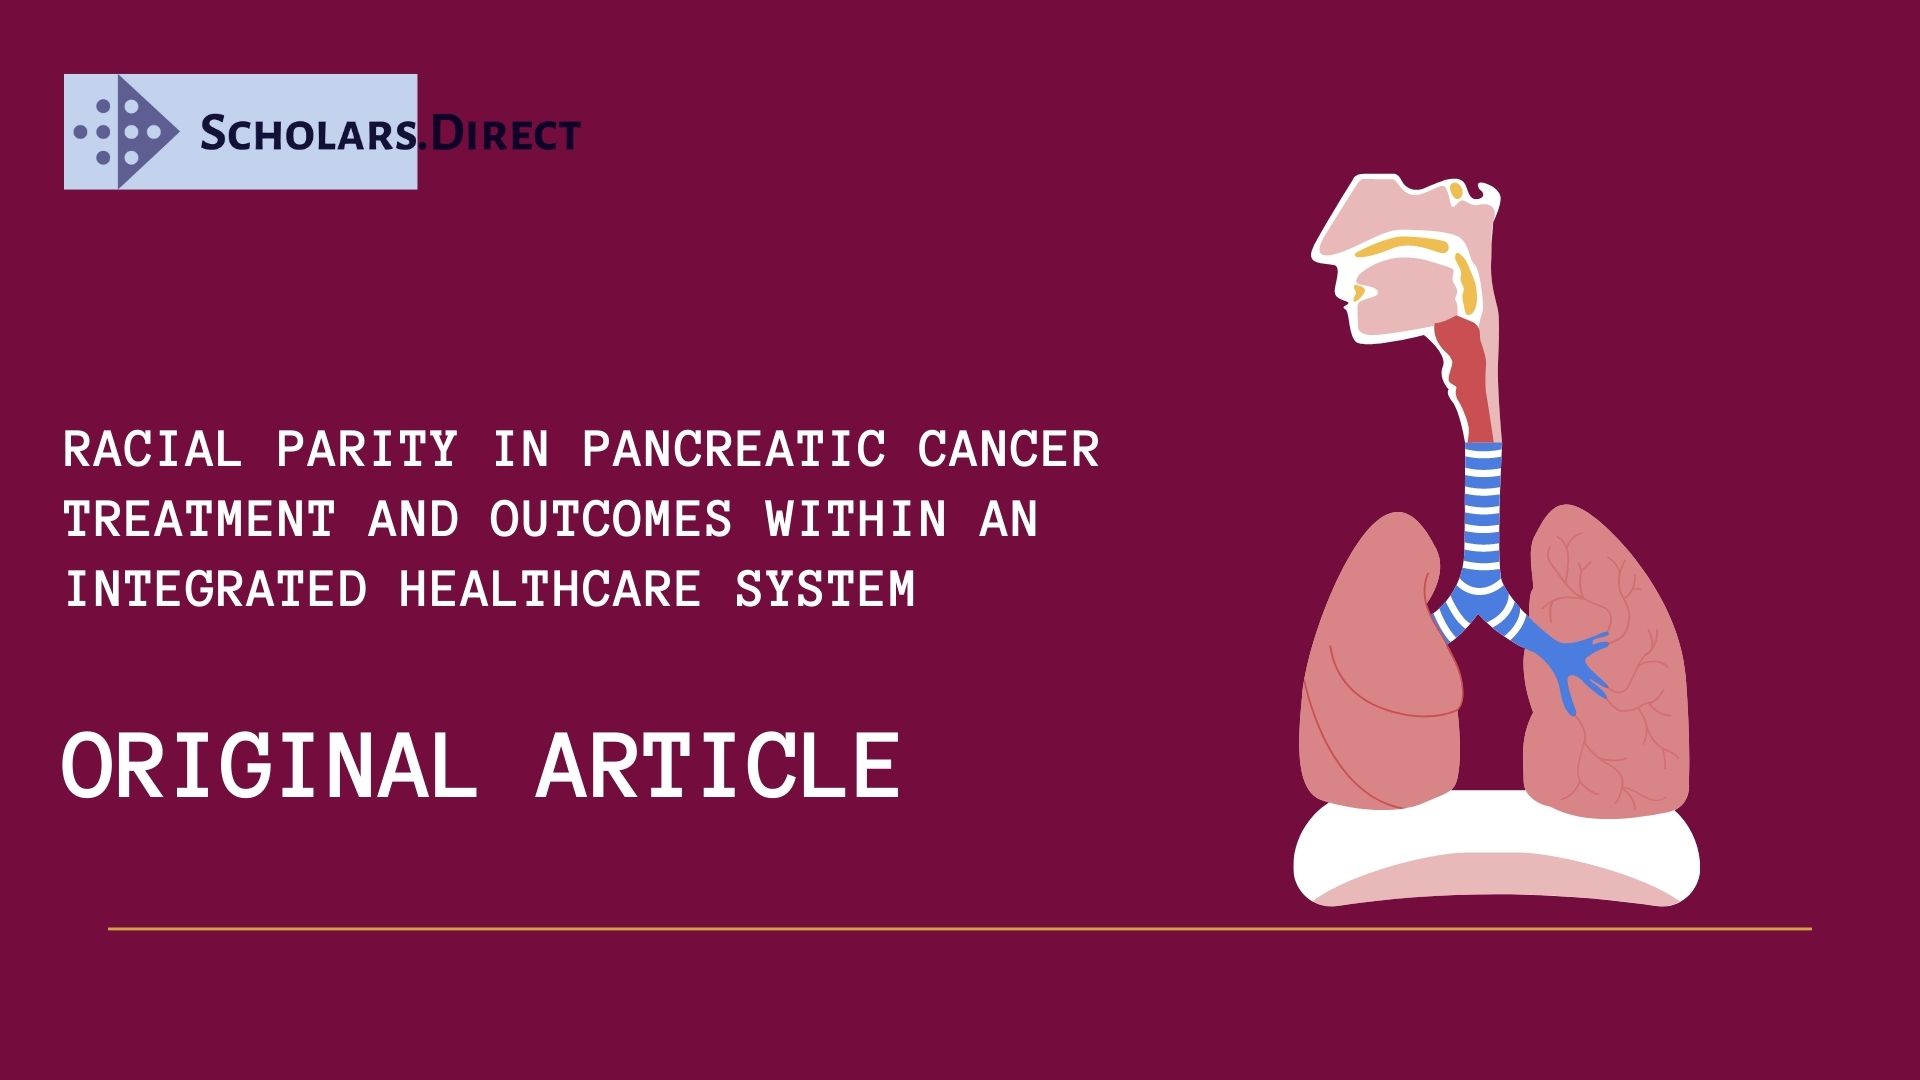 Journal of Pancreatic Cancer